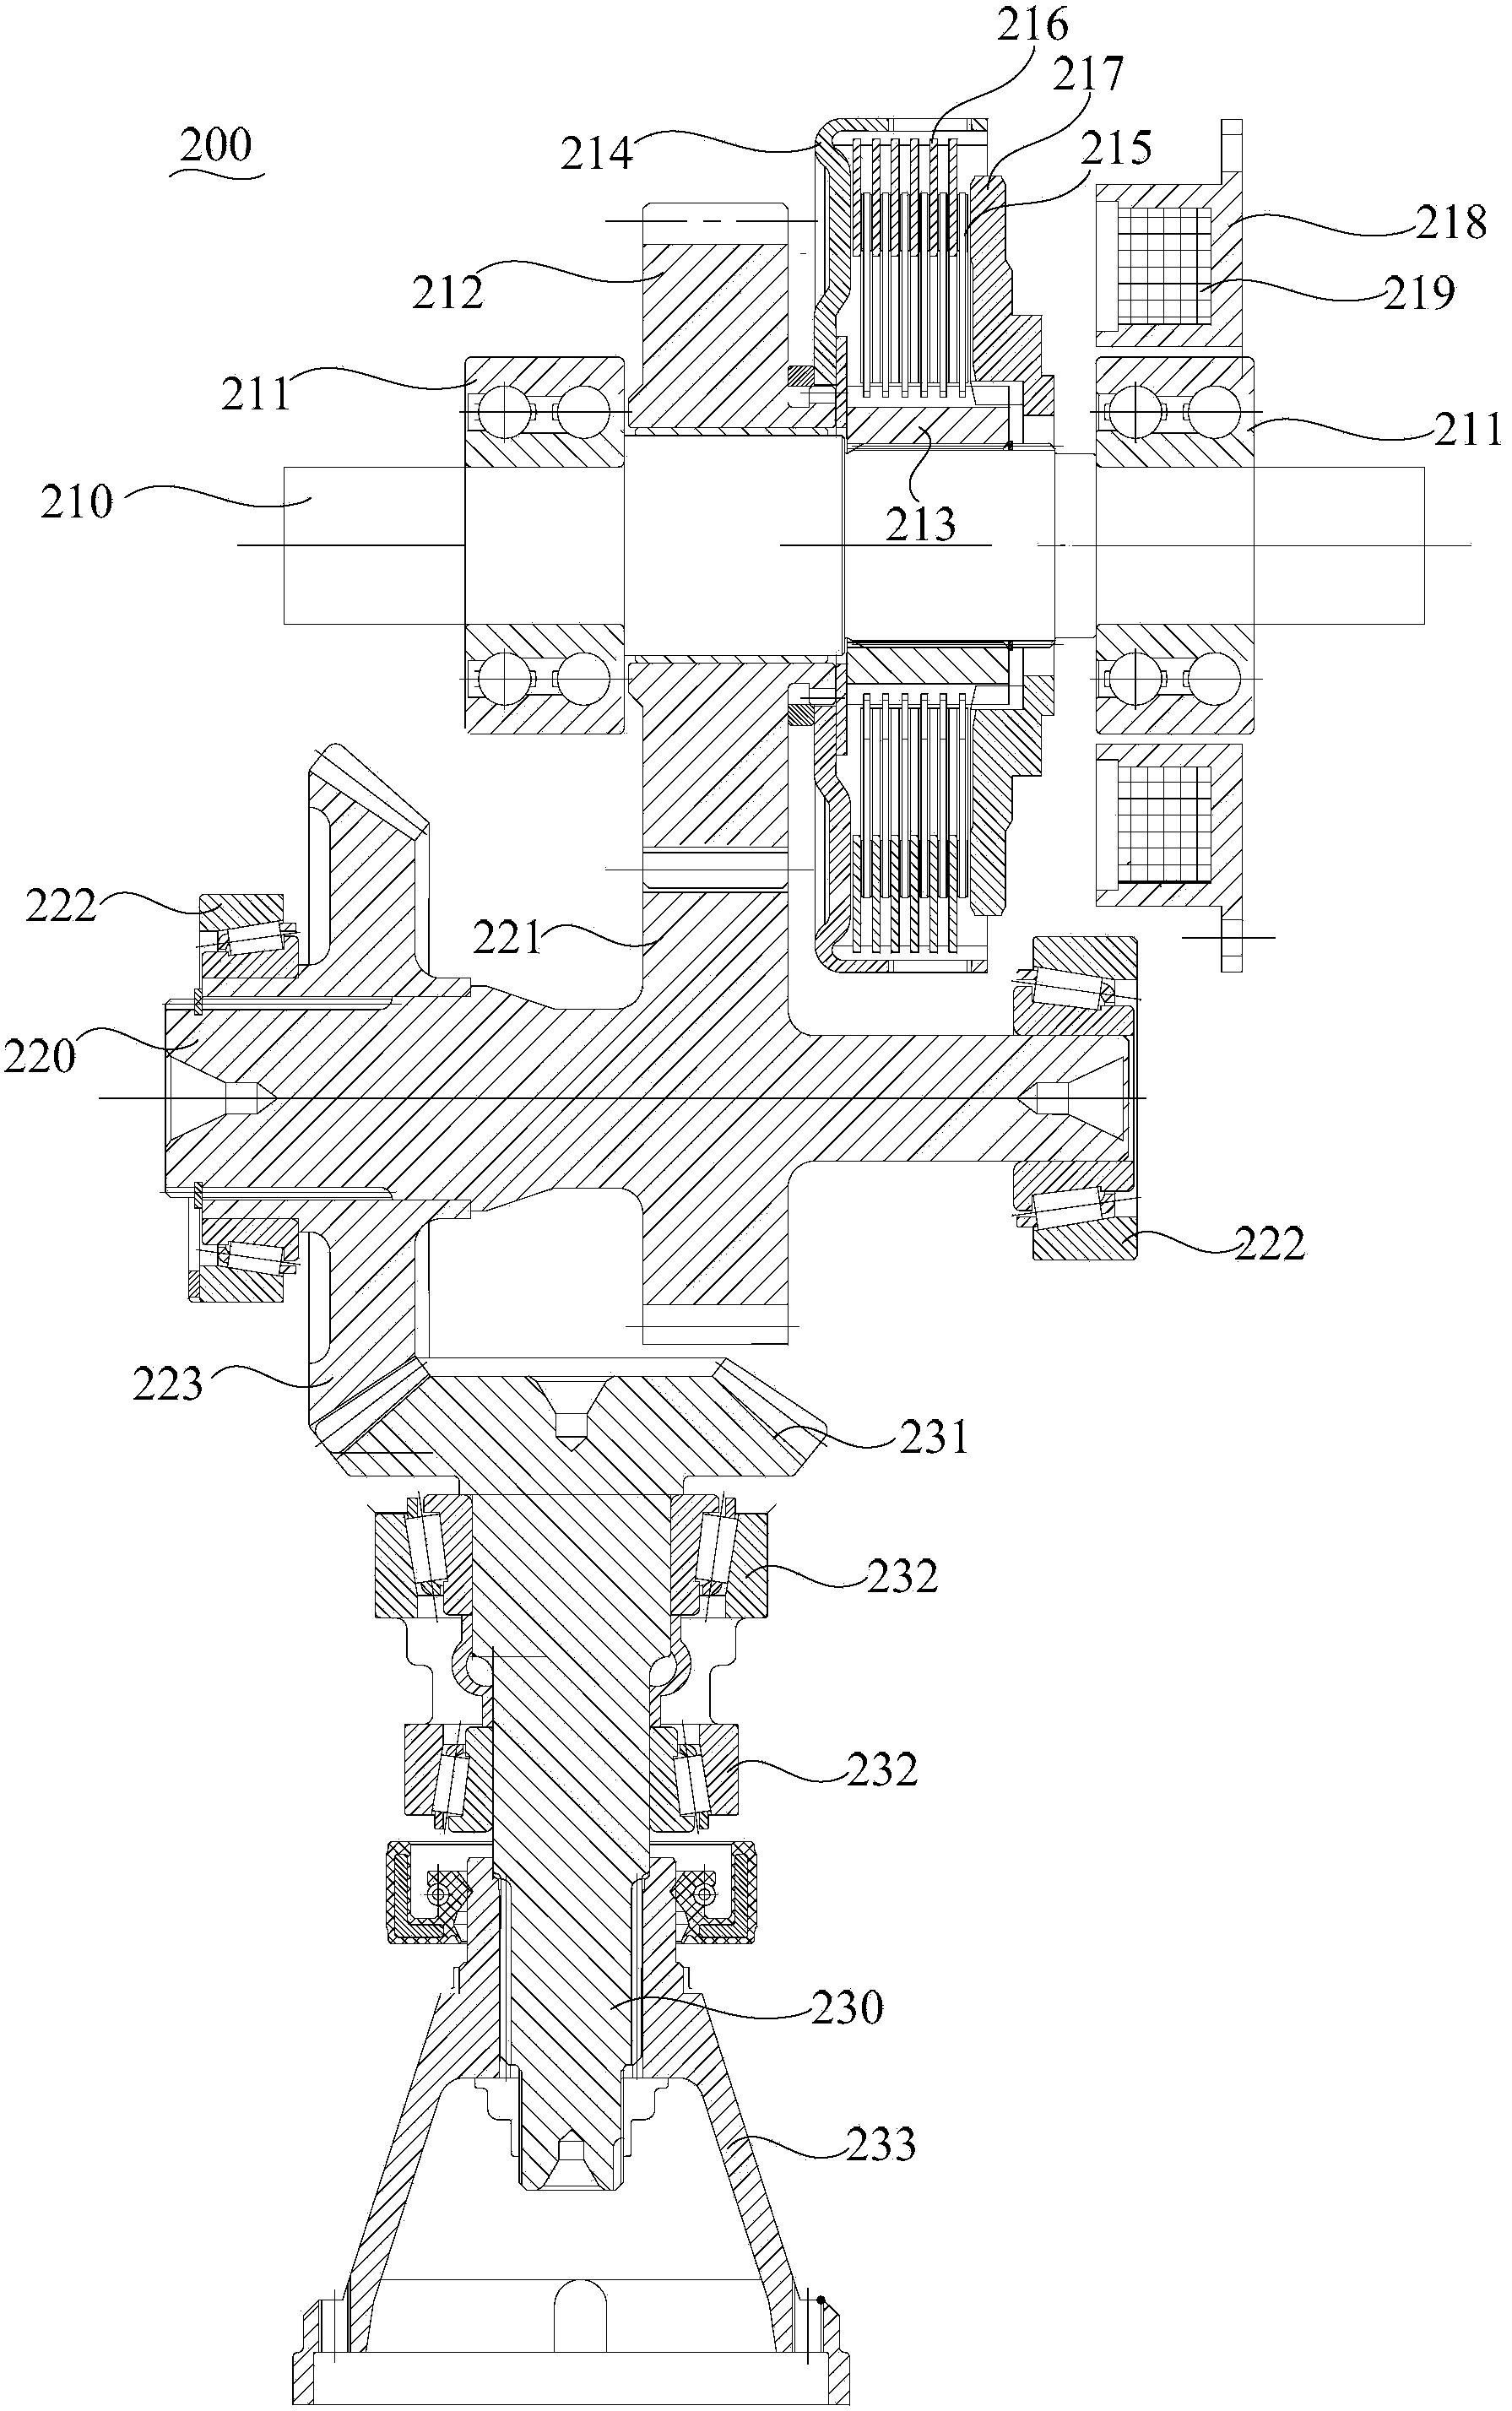 Power divider and power assembly